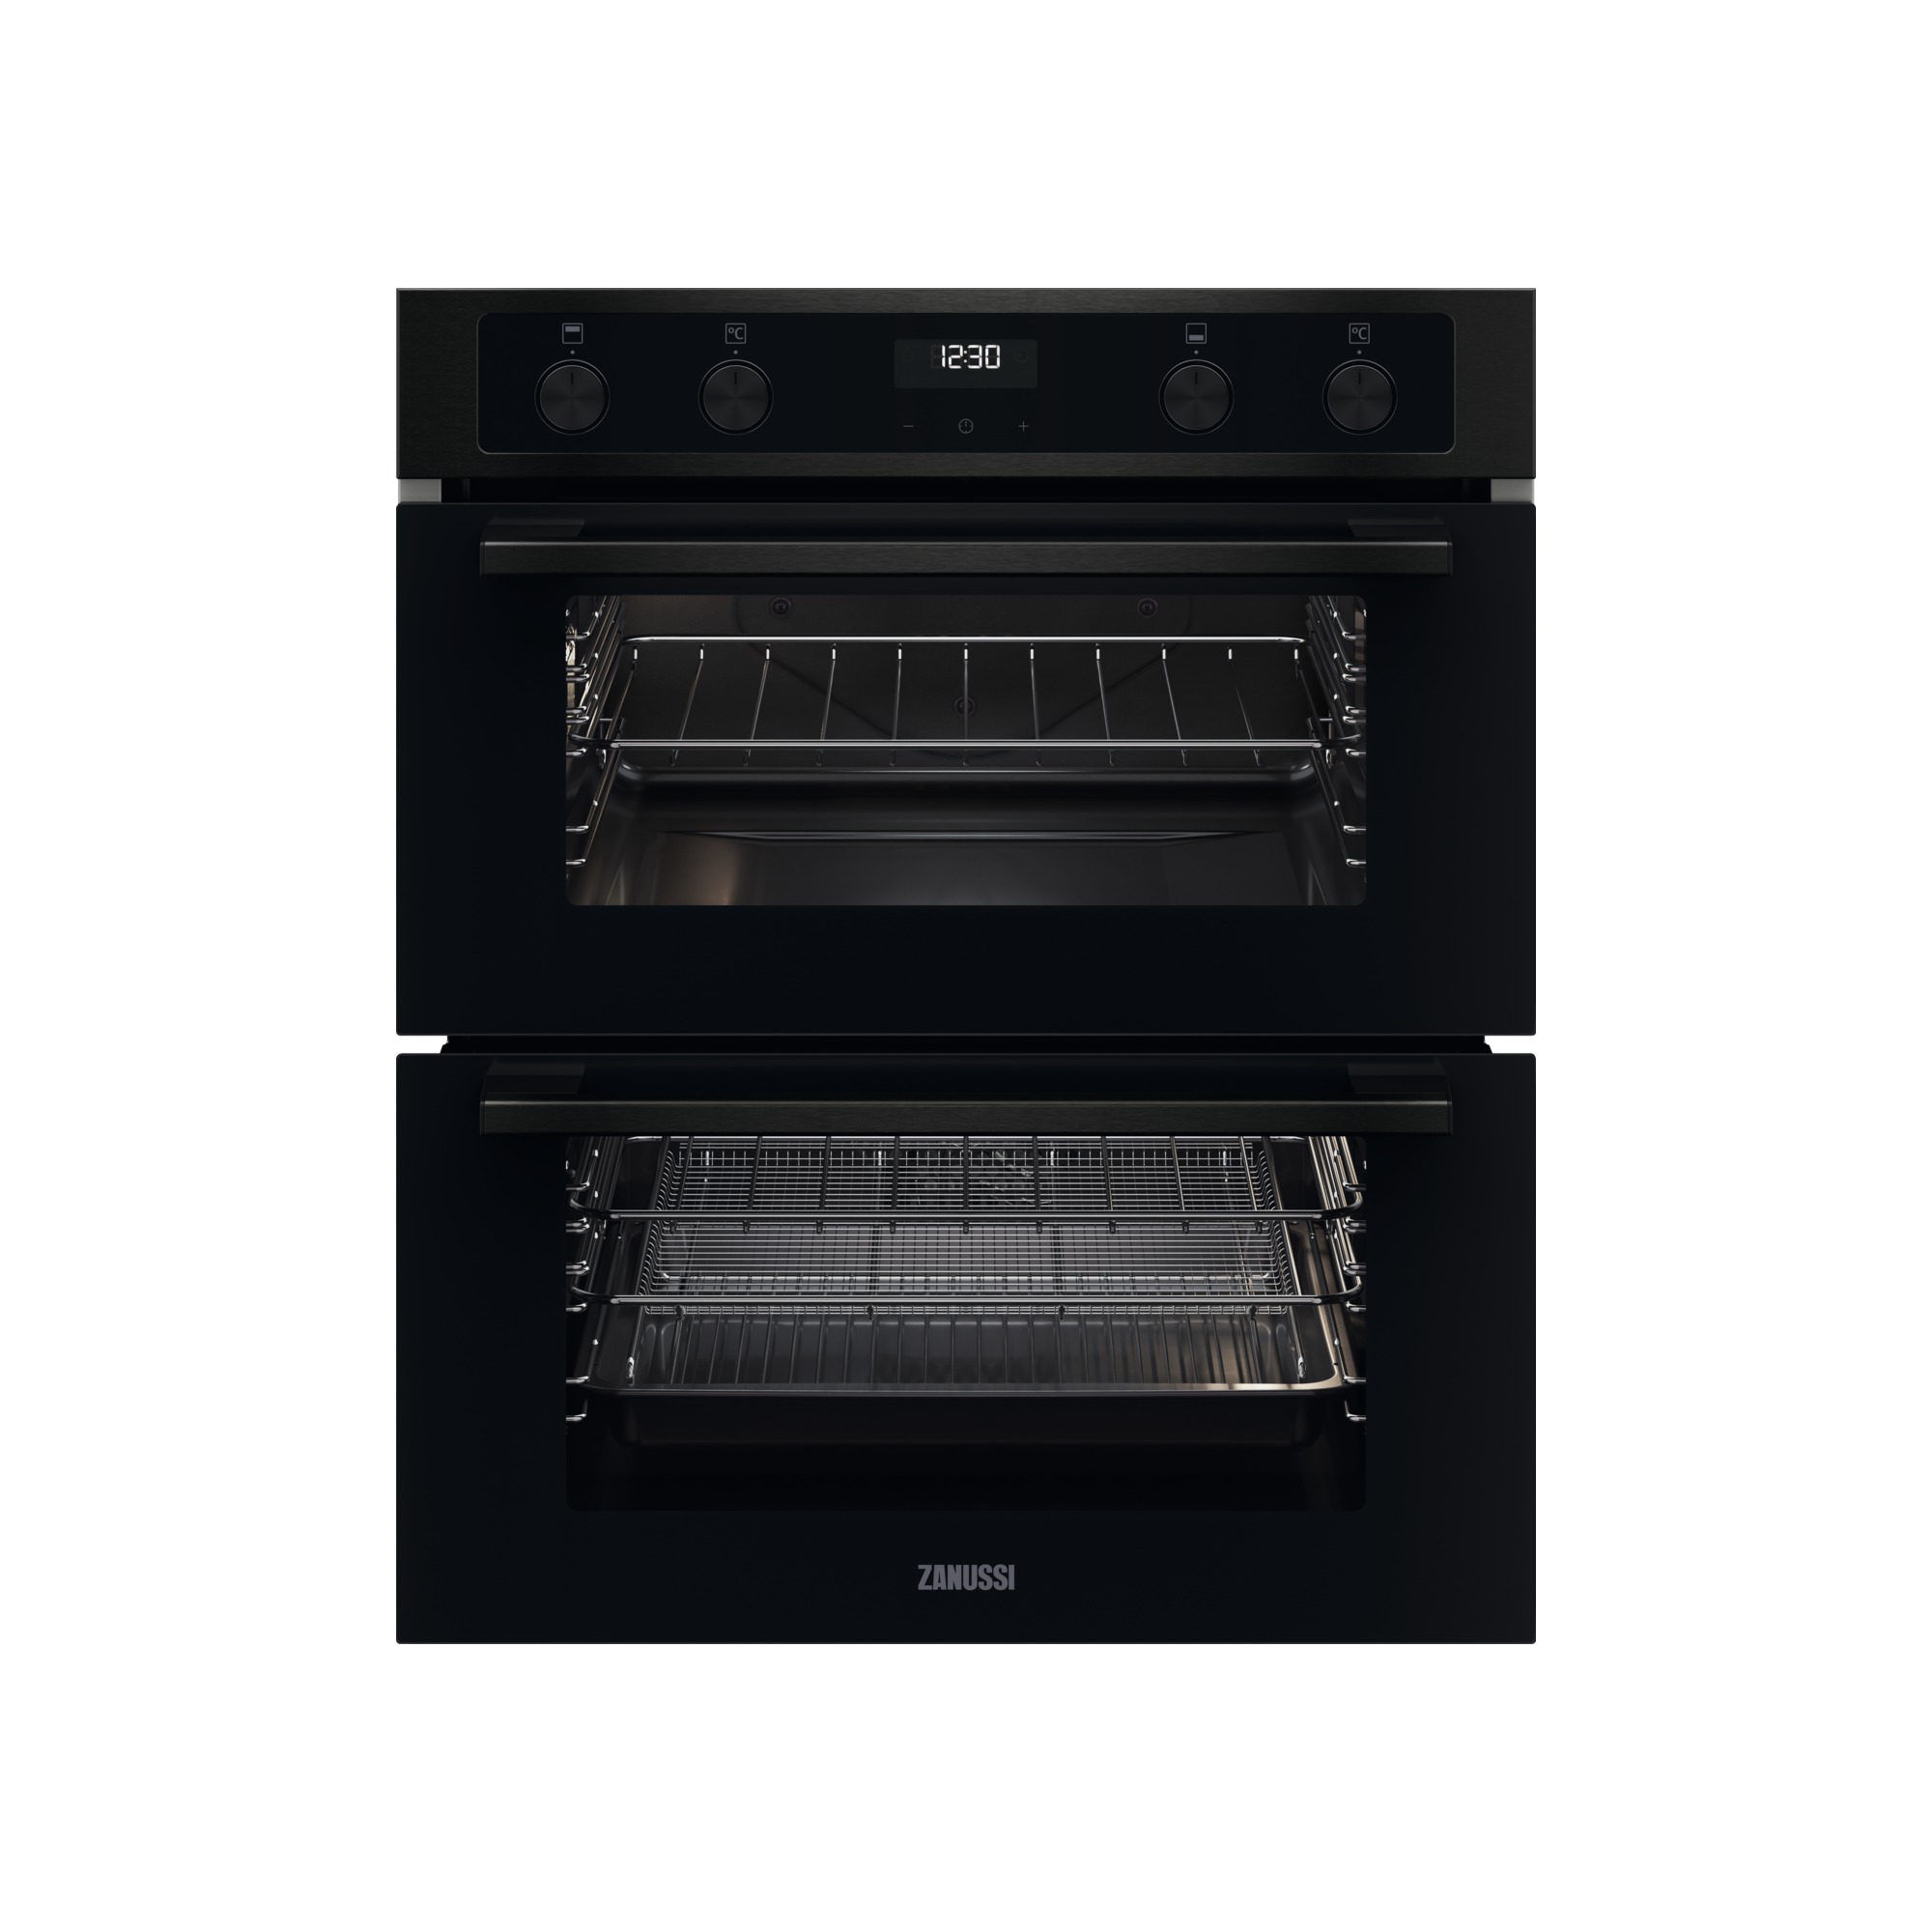 Zanussi Built-in Electric Double Oven Black